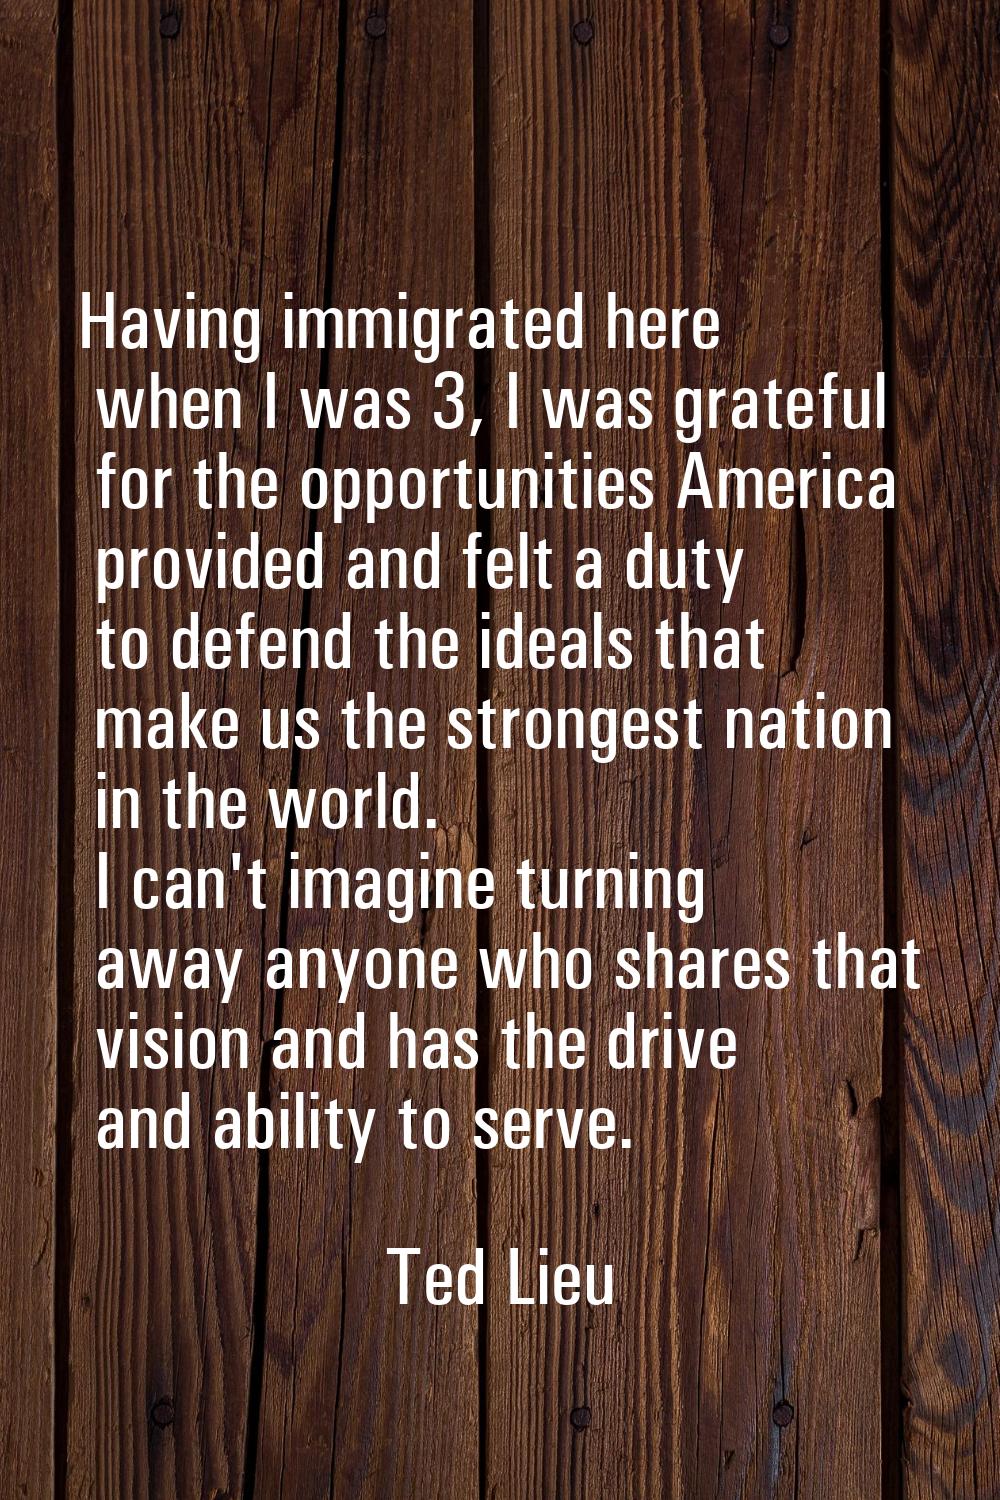 Having immigrated here when I was 3, I was grateful for the opportunities America provided and felt